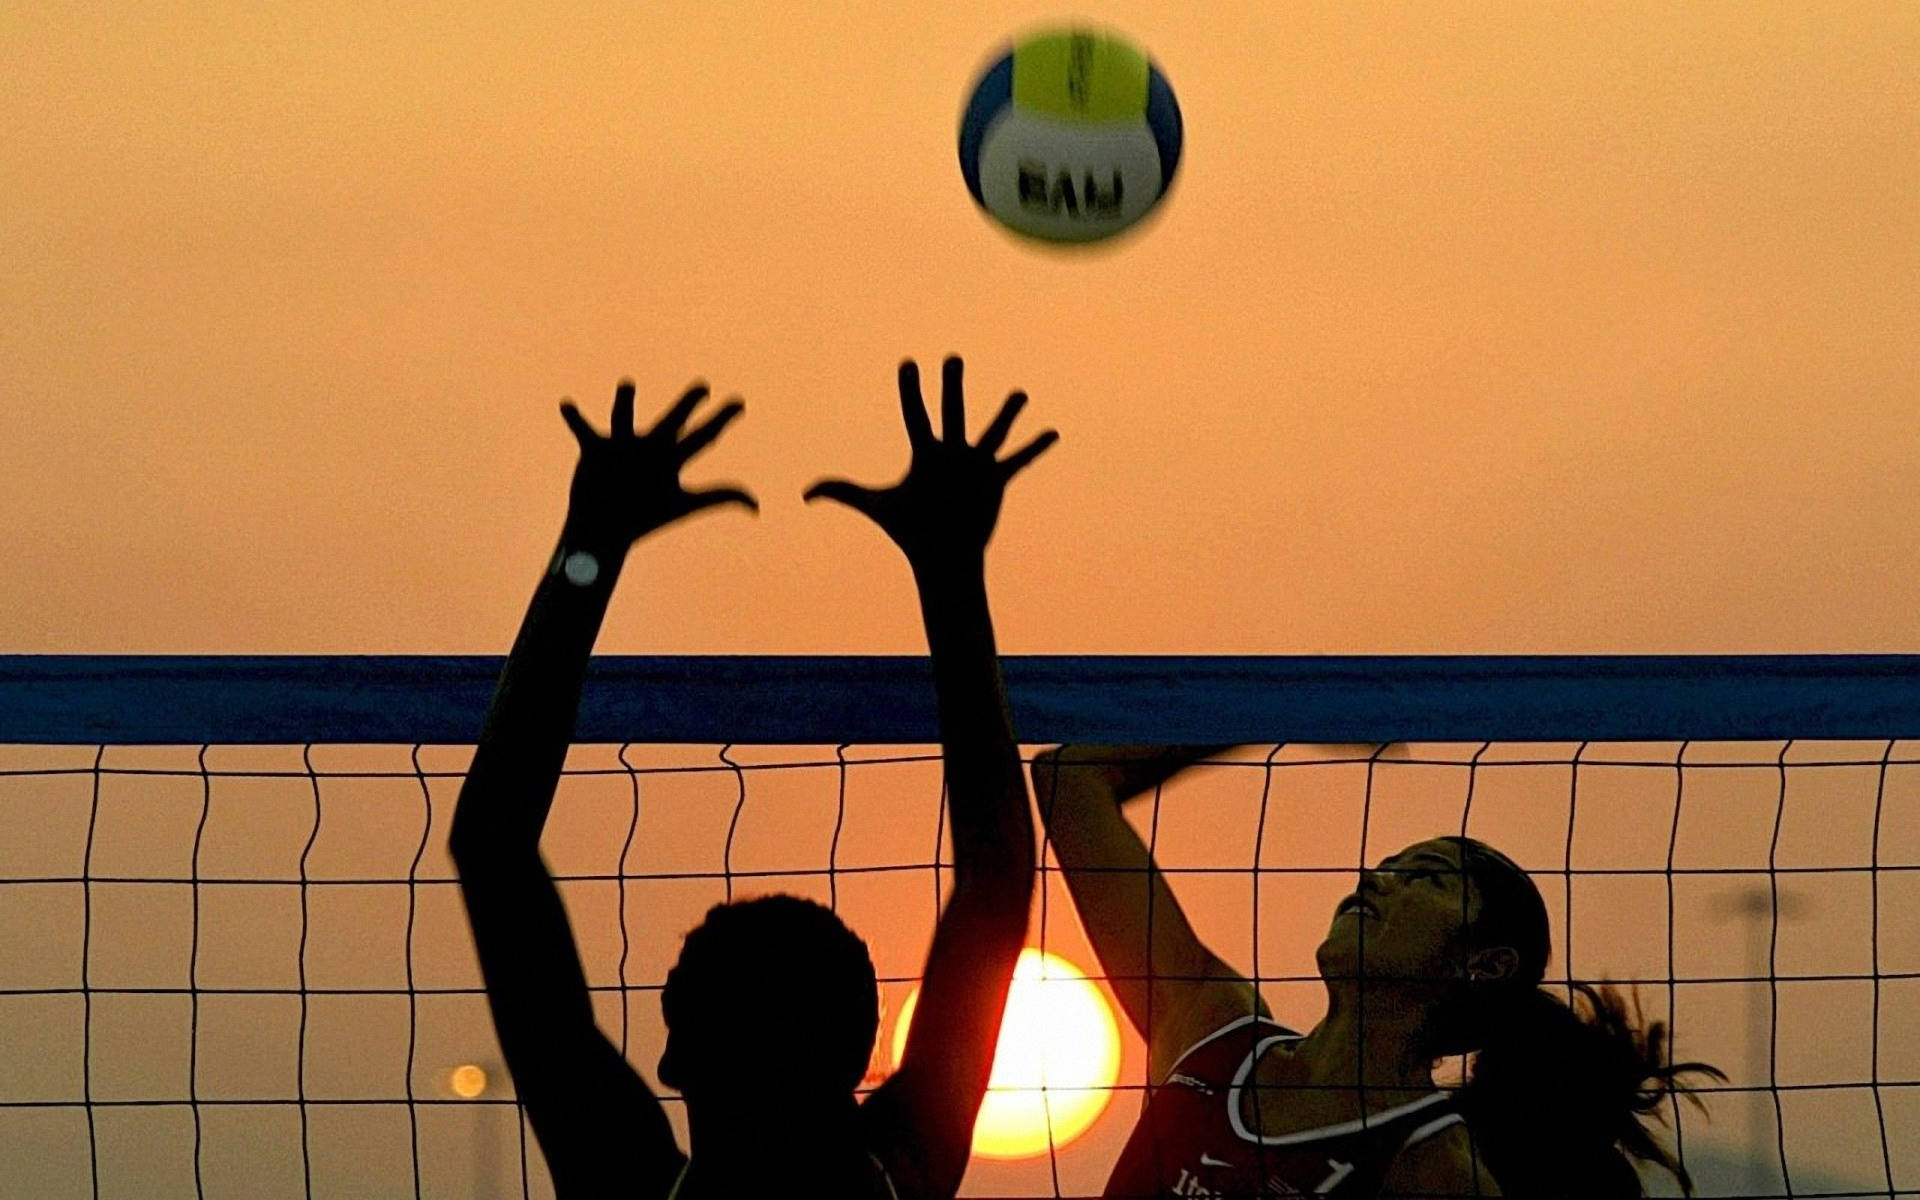 Volleybollestetisk Strand Solnedgång Is The Translation Of Volleyball Aesthetic Beach Sunset In Context Of Computer Or Mobile Wallpaper. Wallpaper